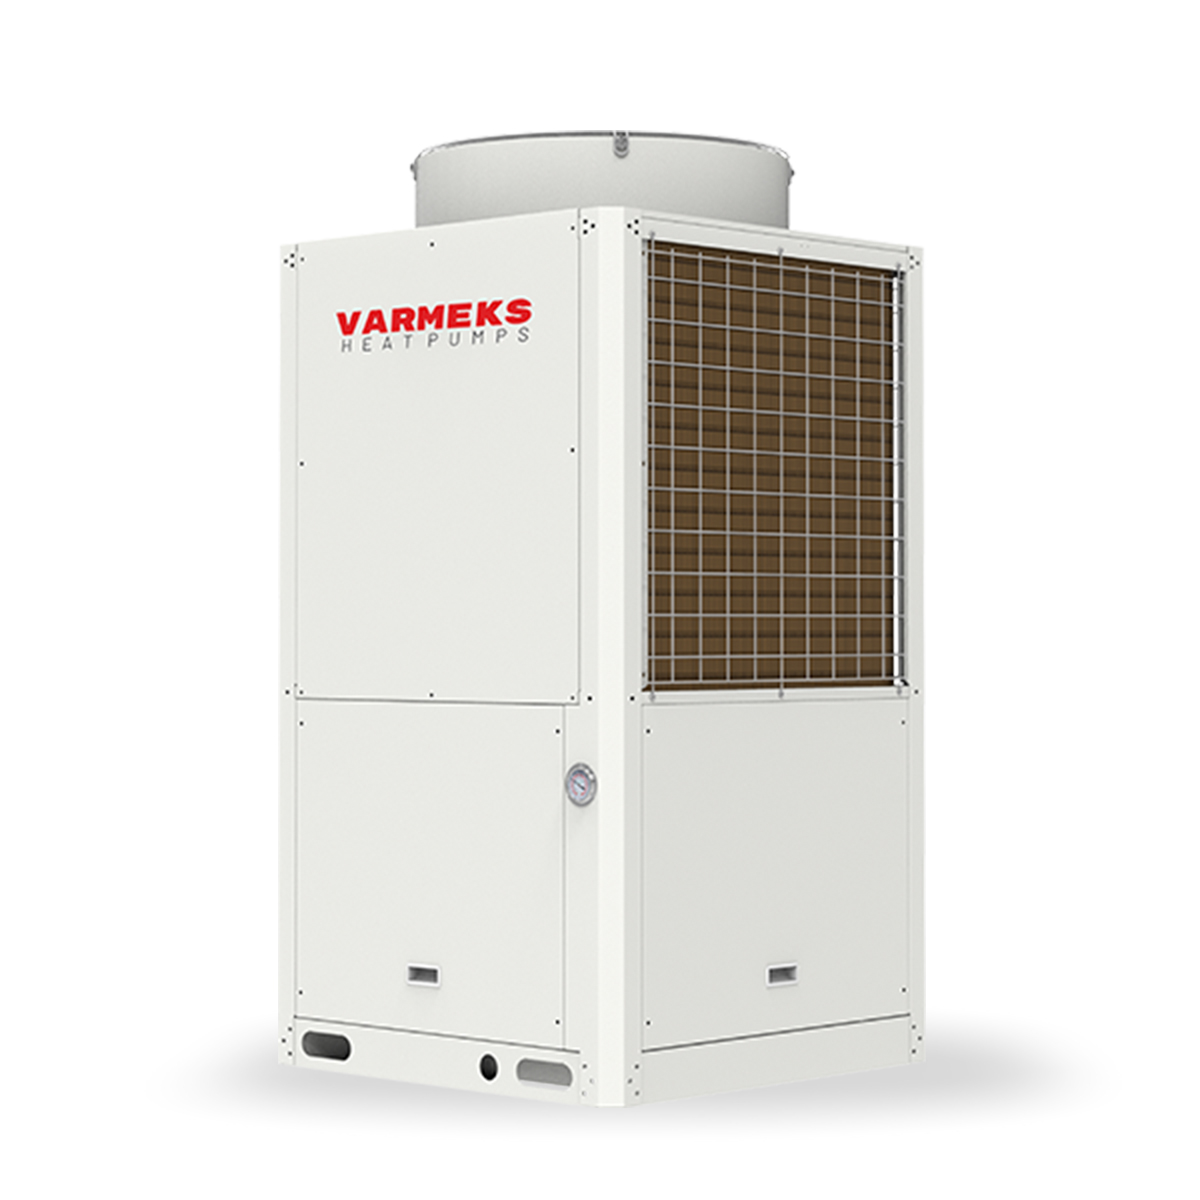 Varm Commercial Duo Series 42 kW